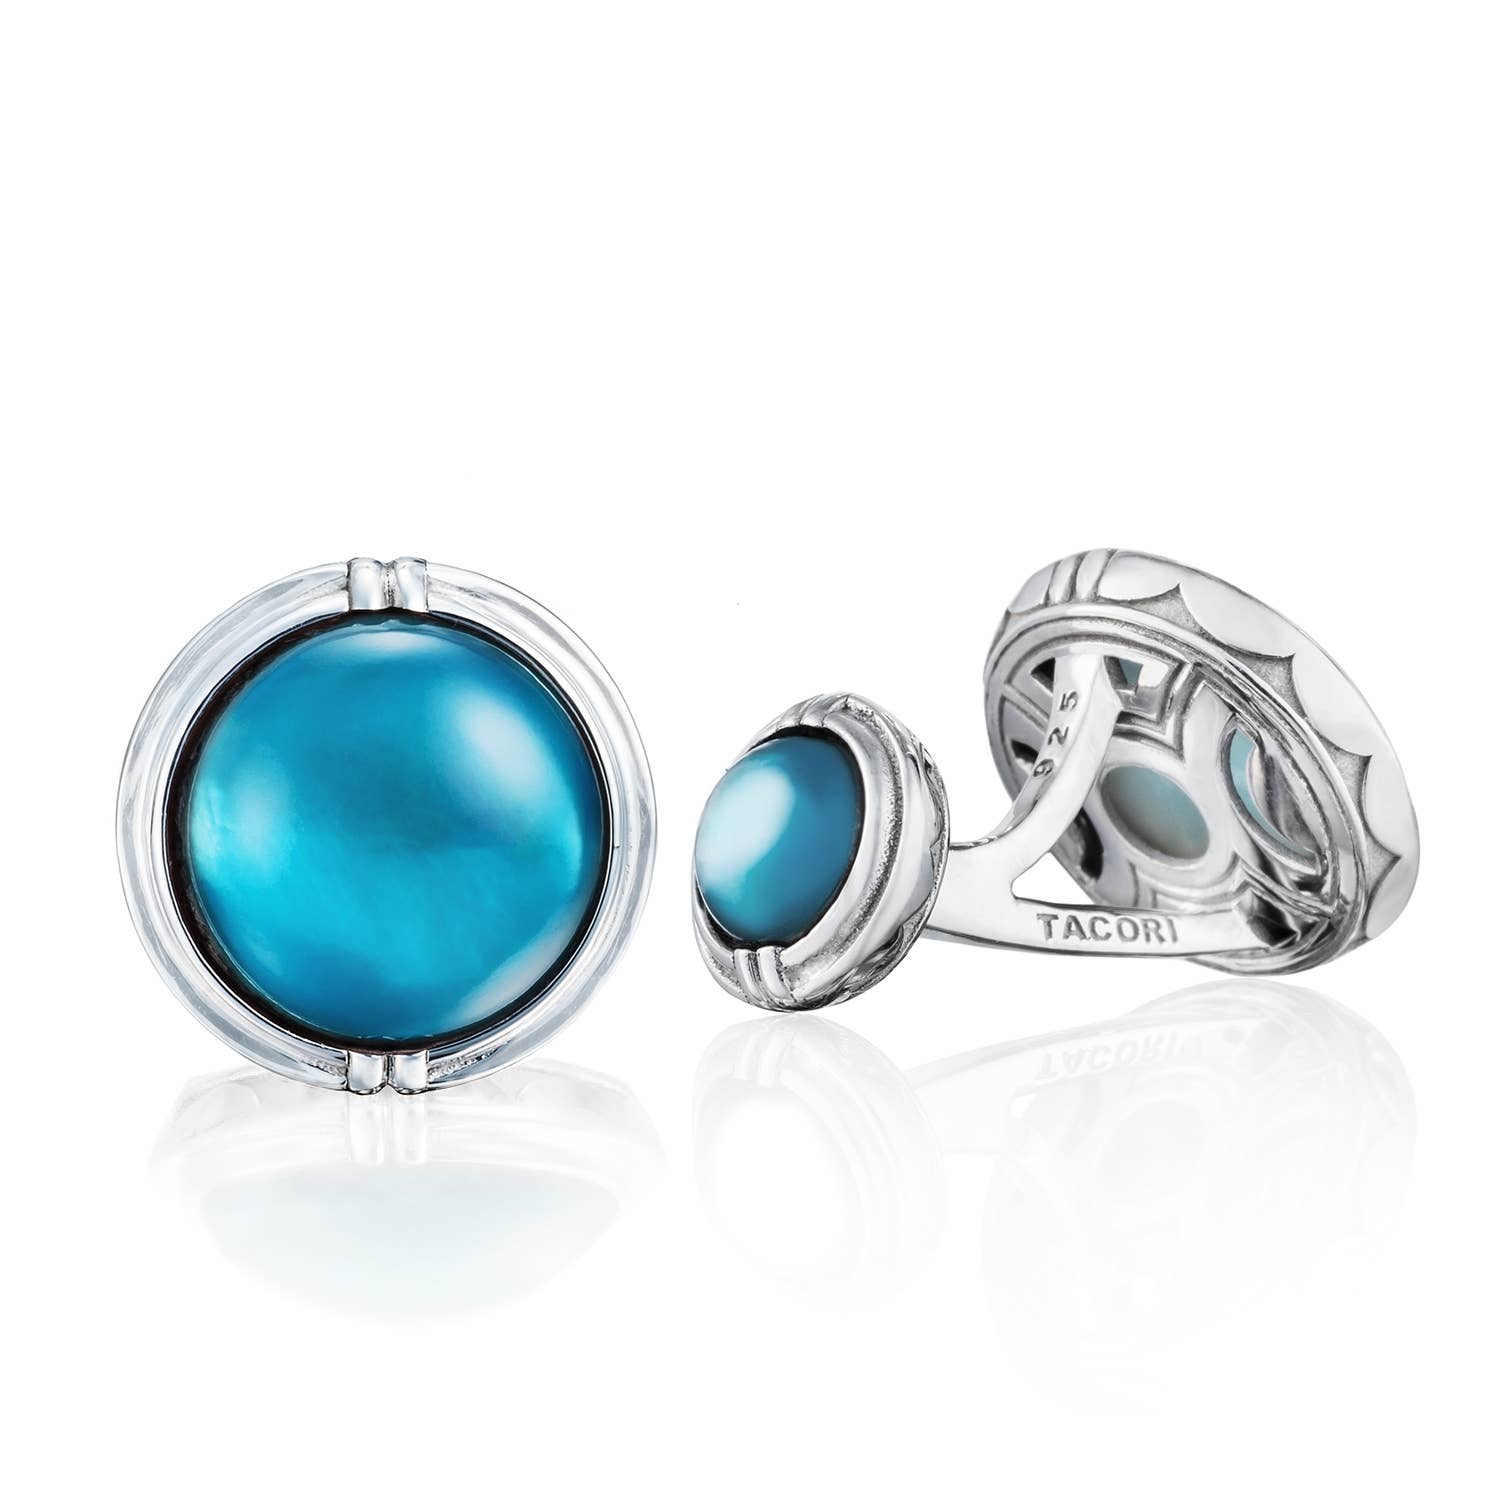 Classic Cabochon Cuff Links featuring Sky Blue Topaz over Mother of Pearl